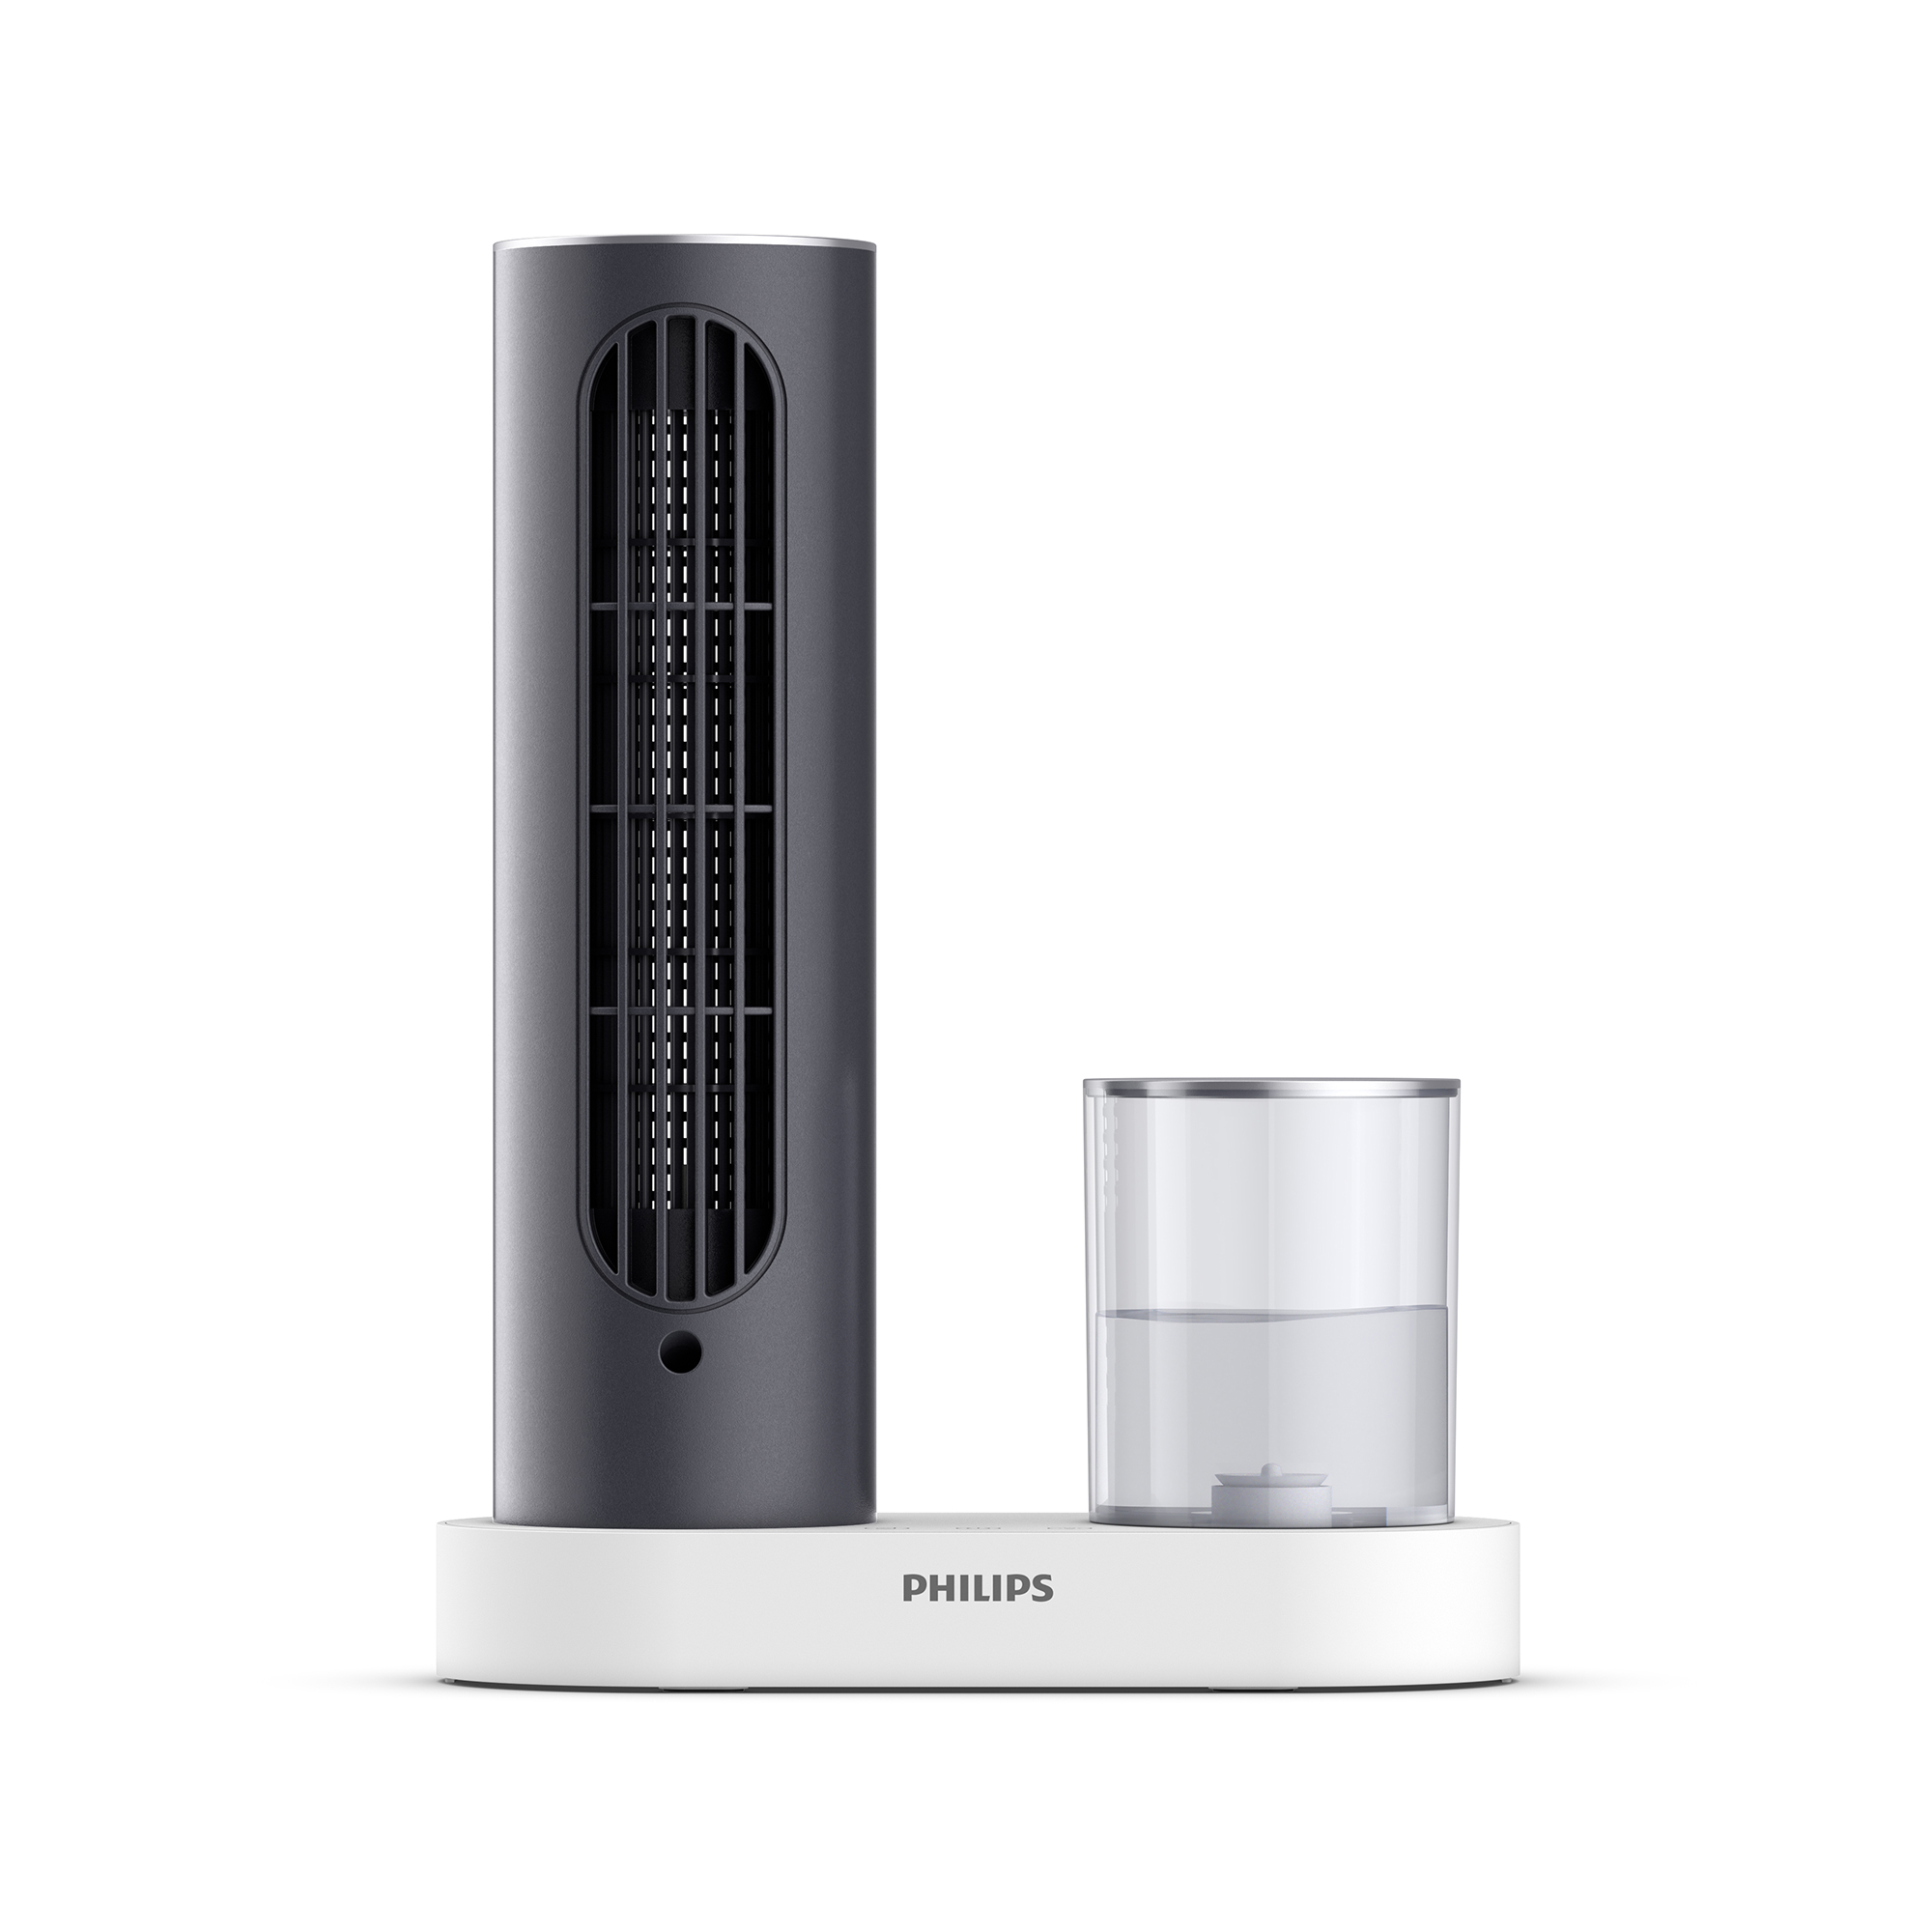 Philips Tower Fan Series 3000 - ACR3124TX